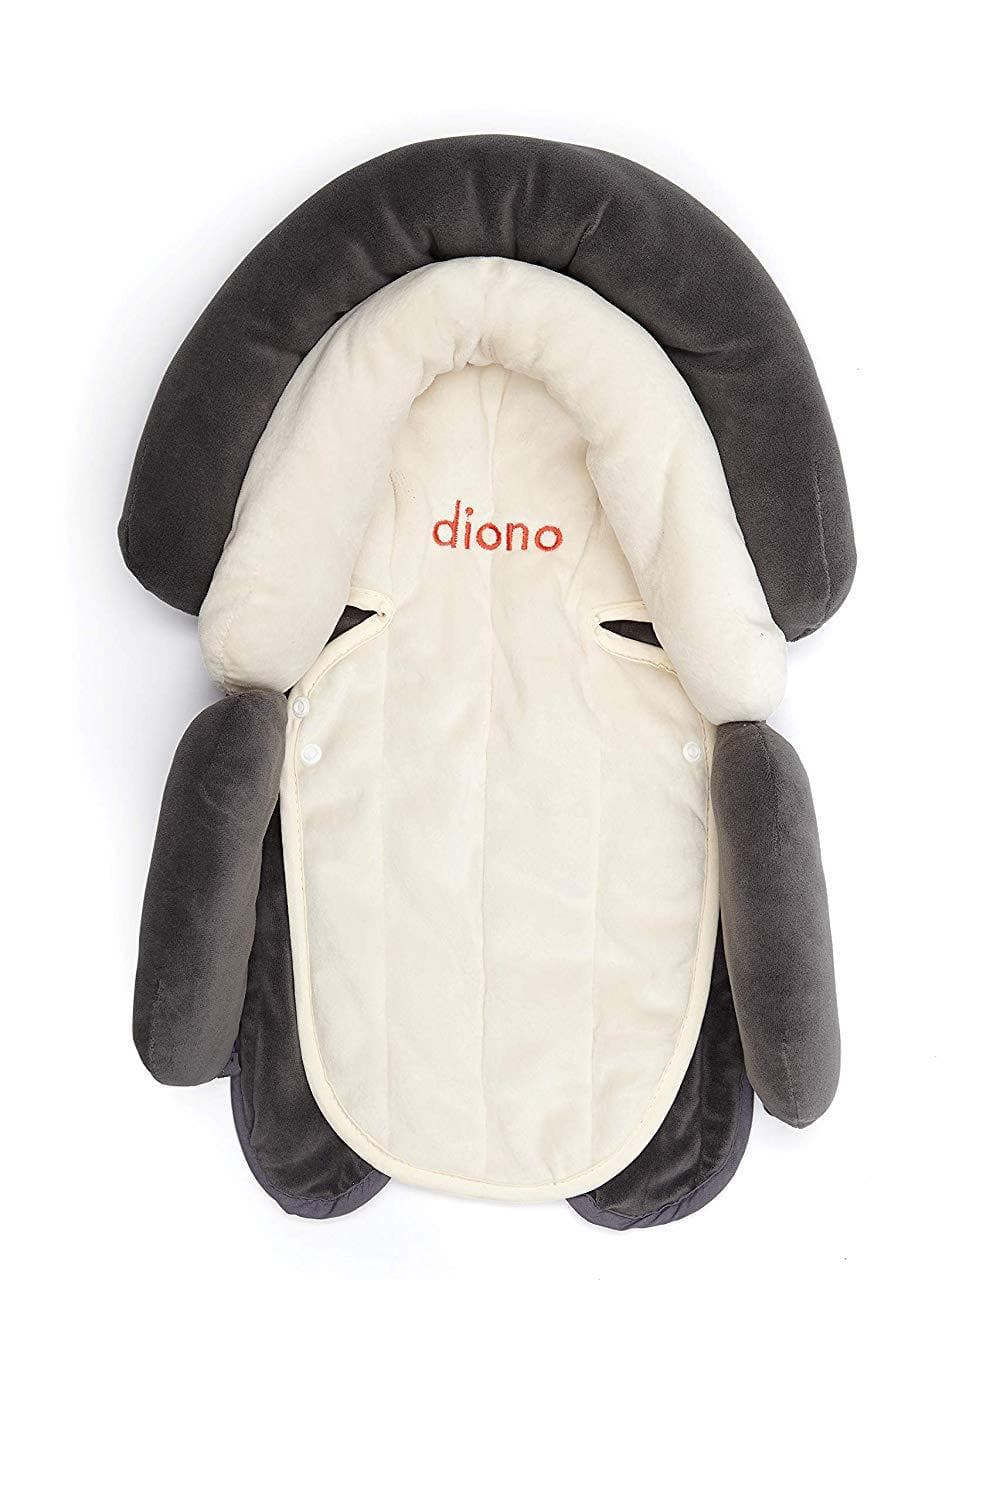 DIONO 2 in 1 Head Support Cuddle Soft - ANB Baby -$20 - $50